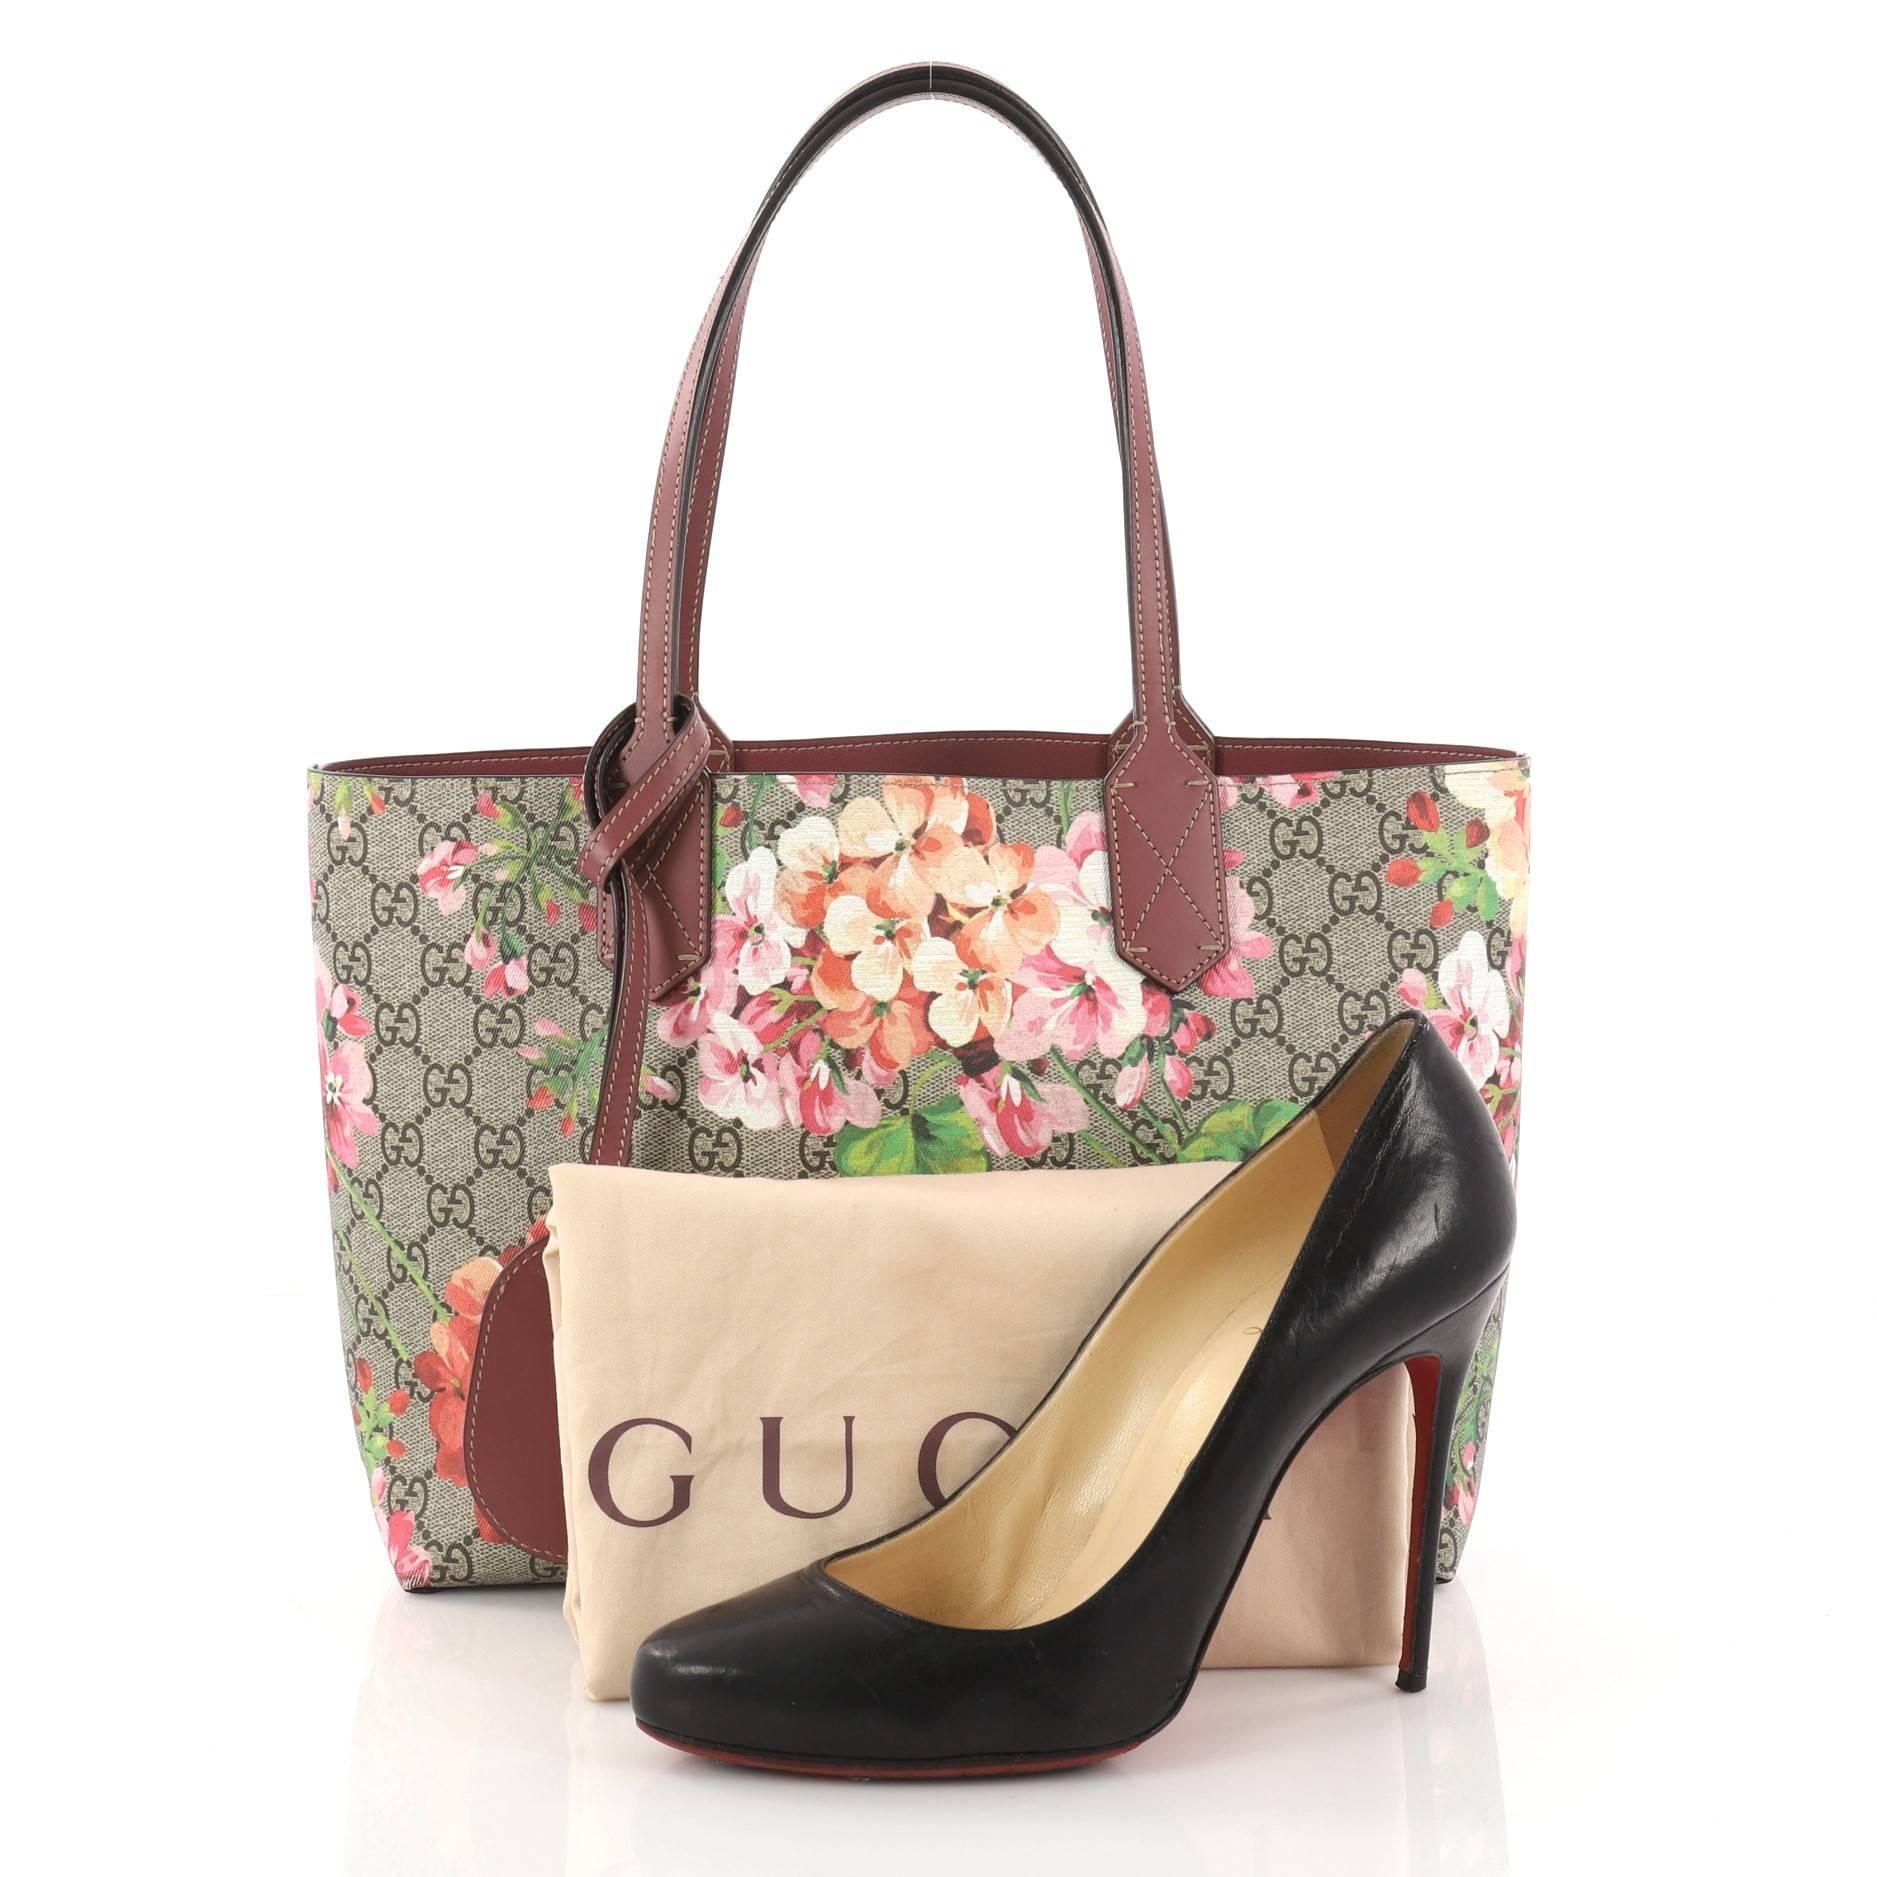 This authentic Gucci Reversible Gucci Reversible Tote Blooms GG Print Leather Small is perfect for everyday casual looks. Crafted in brown GG blooms print leather and dark mauve leather on its reverse side with contrast beige stitching, this simple